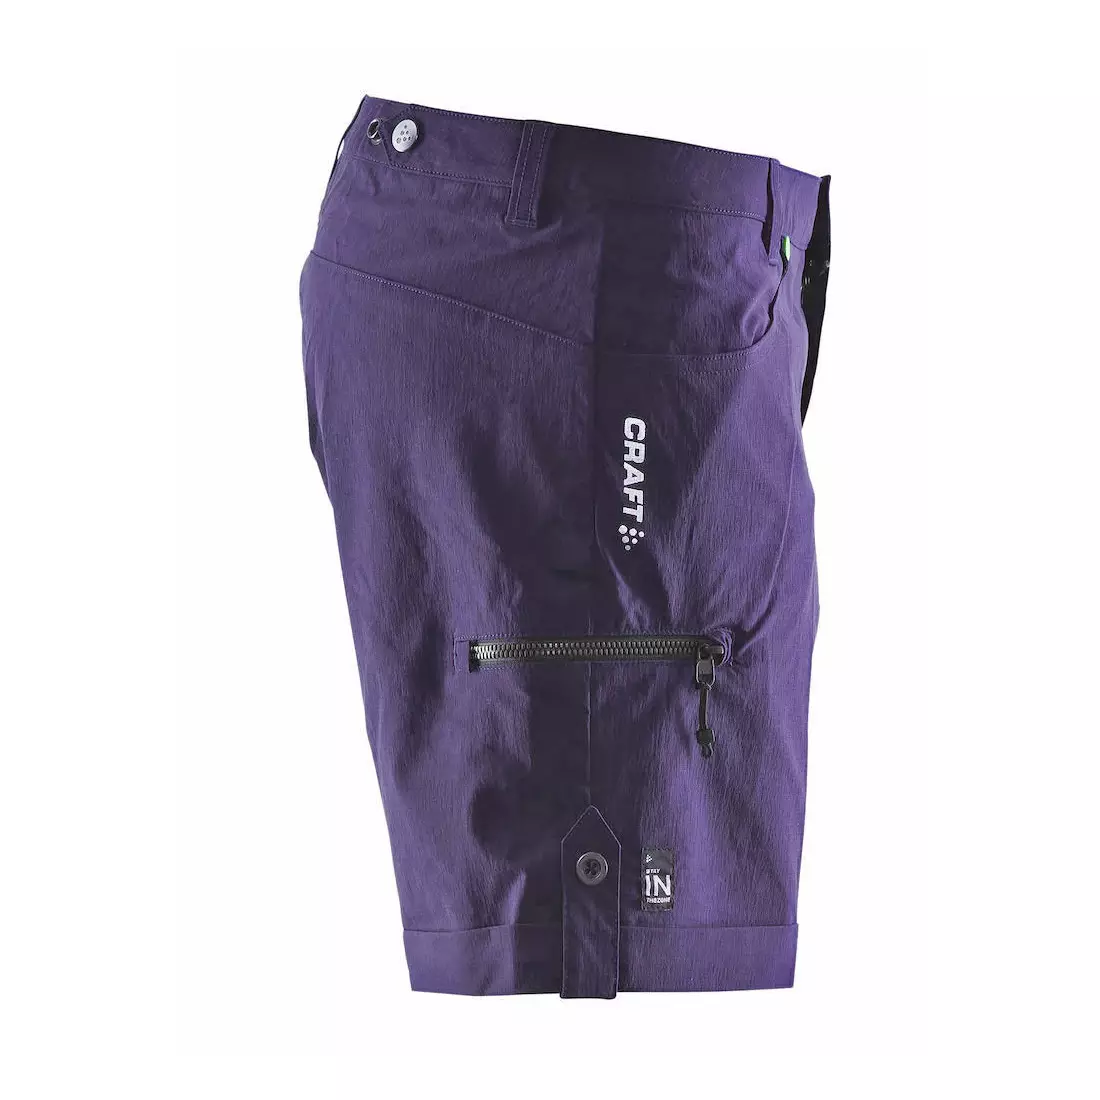 CRAFT IN THE ZONE women's cycling shorts 1902647-1463